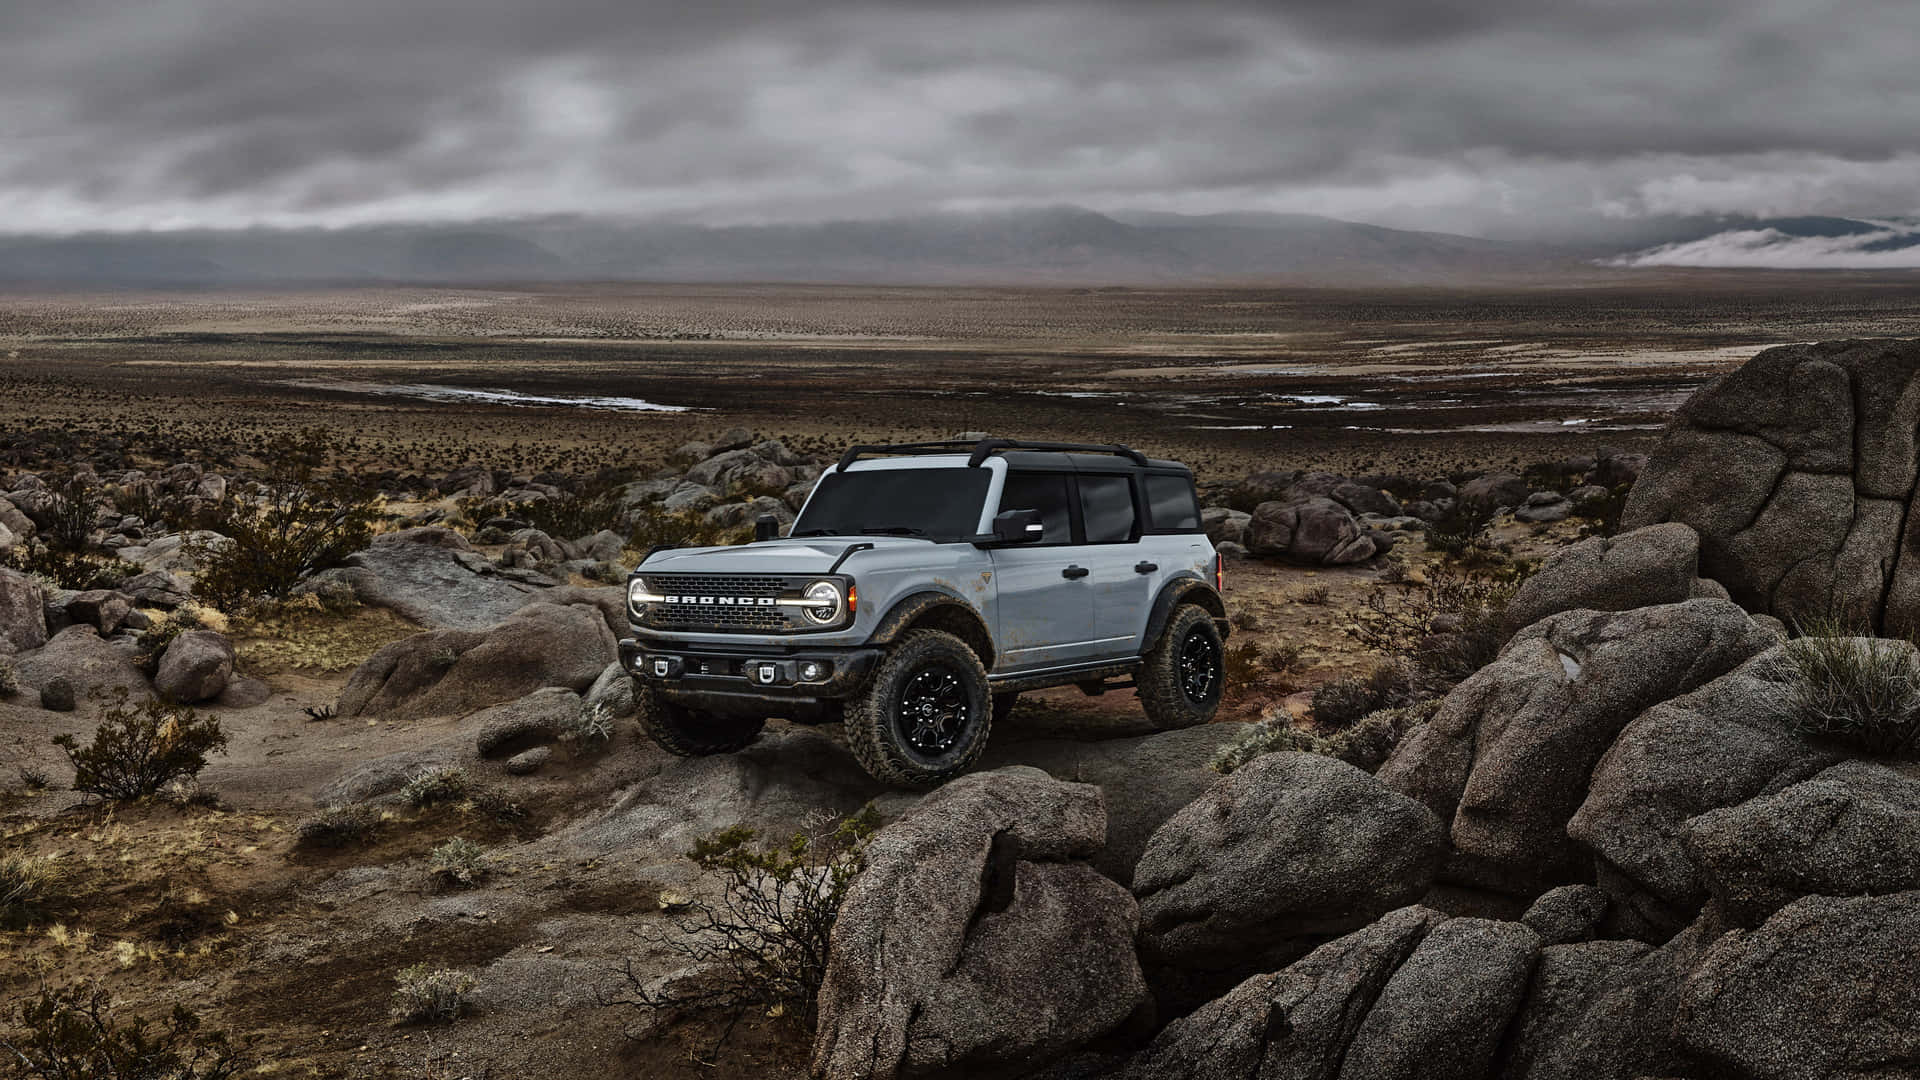 "The Iconic Ford Bronco is Ready for Any Adventure"